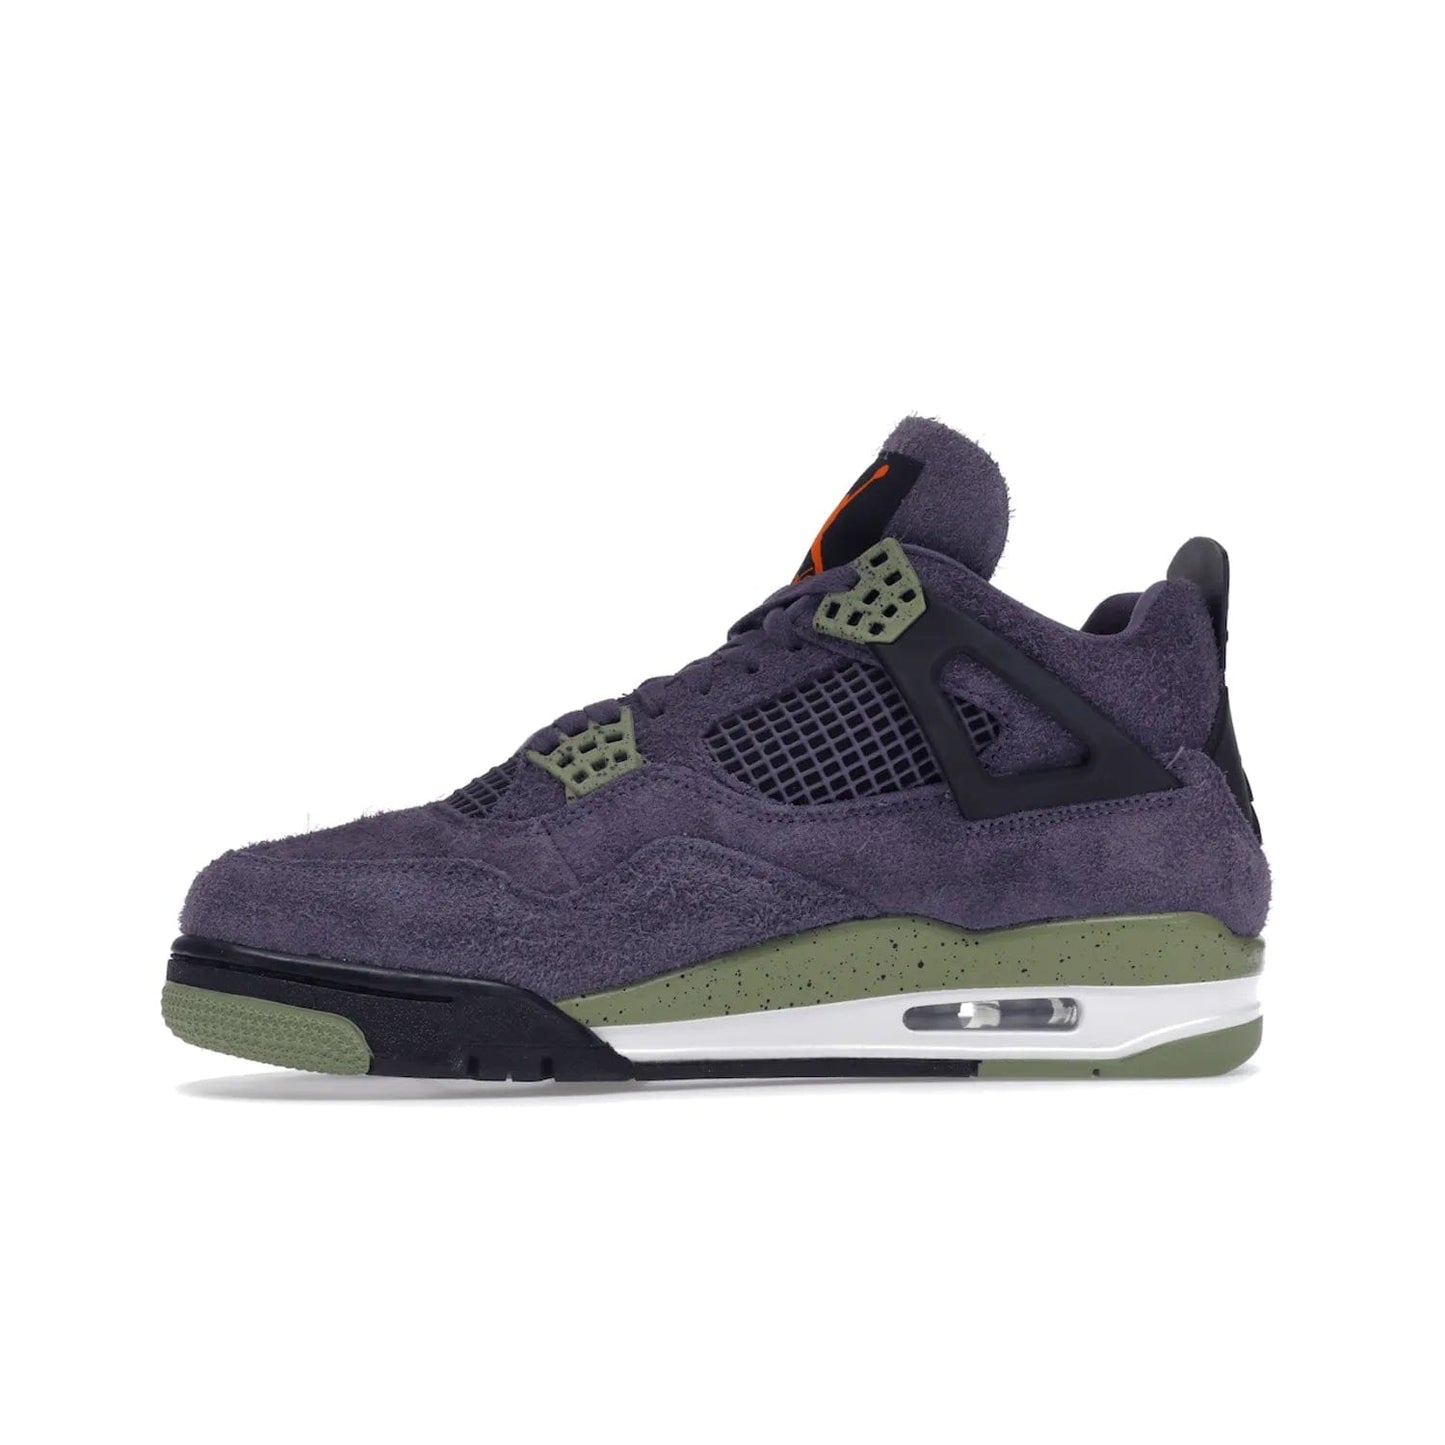 Jordan 4 Retro Canyon Purple (Women's) - Image 18 - Only at www.BallersClubKickz.com - New Air Jordan 4 Retro Canyon Purple W sneaker features shaggy purple suede, lime highlights & safety orange Jumpman branding. Classic ankle-hugging silhouette with modern colors released 15/10/2022.